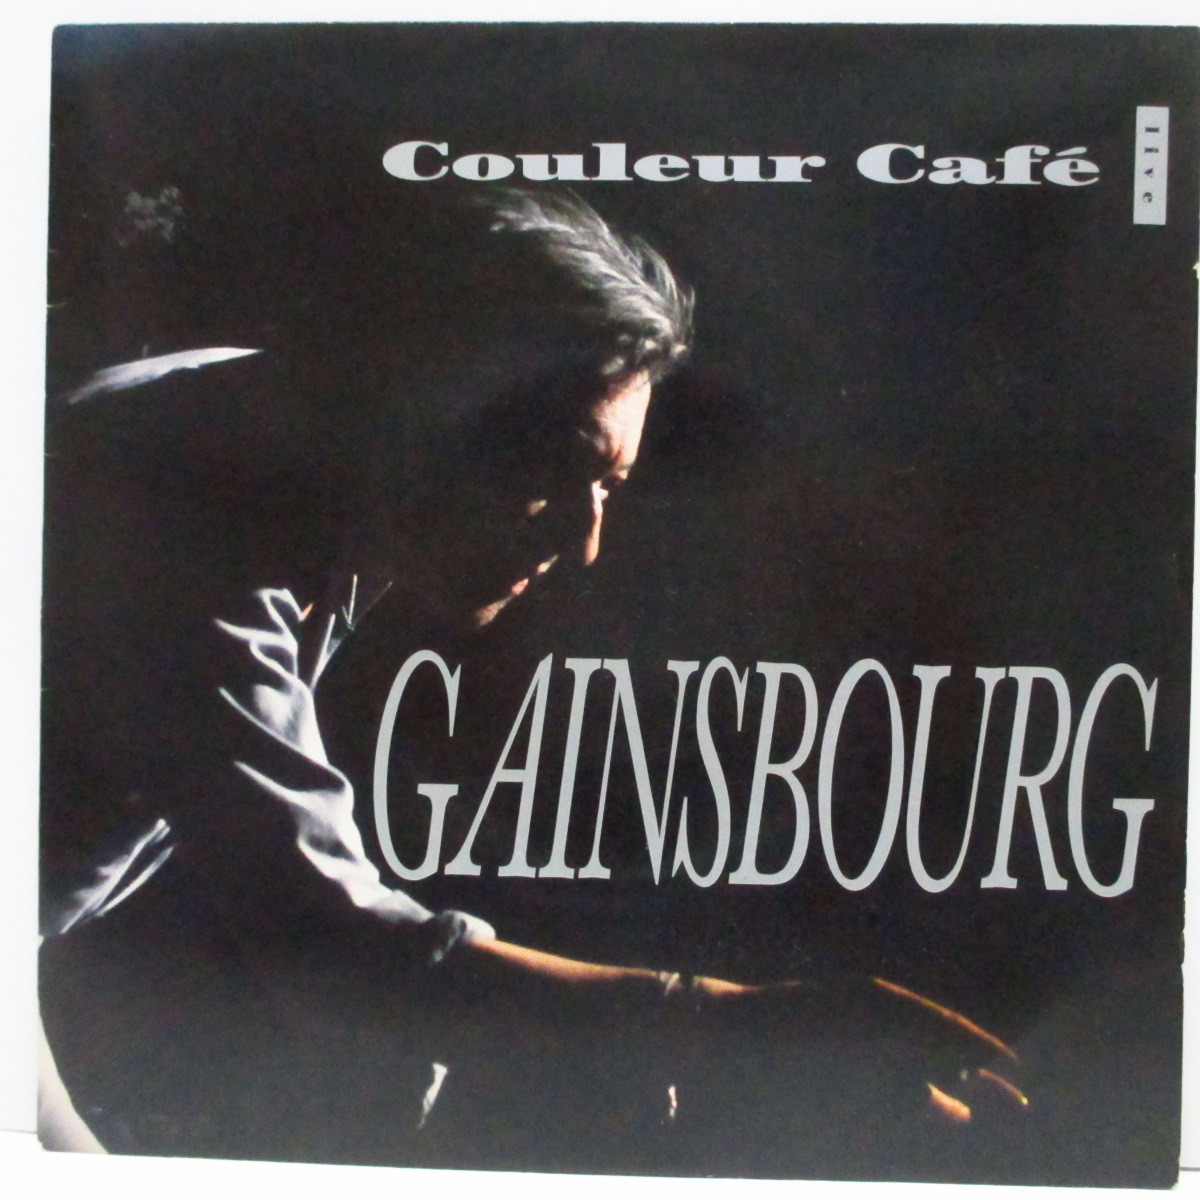 SERGE GAINSBOURG-Couleur Cafe - Live (France オリジナル 7+PS)_画像1